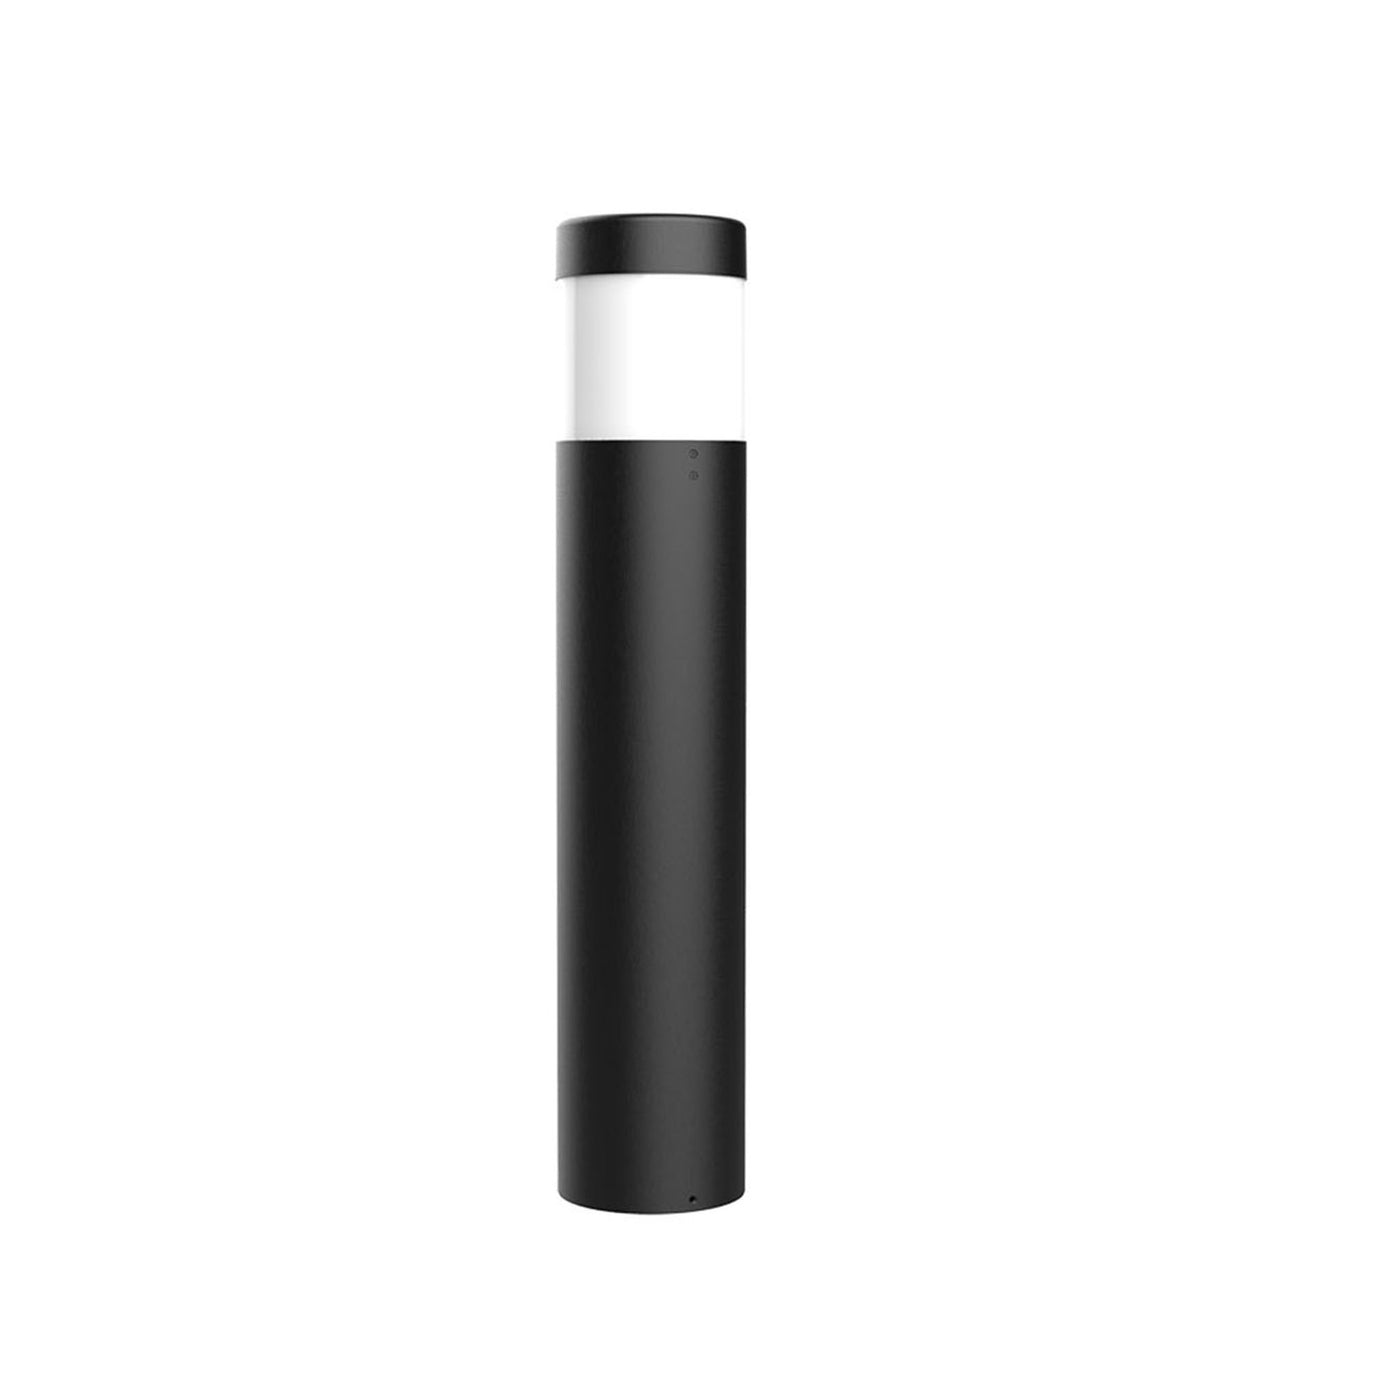 8" Flat Frosted Bollard, 120-277V, 4000K or 5000K, Wattage Selectable, Black or Bronze